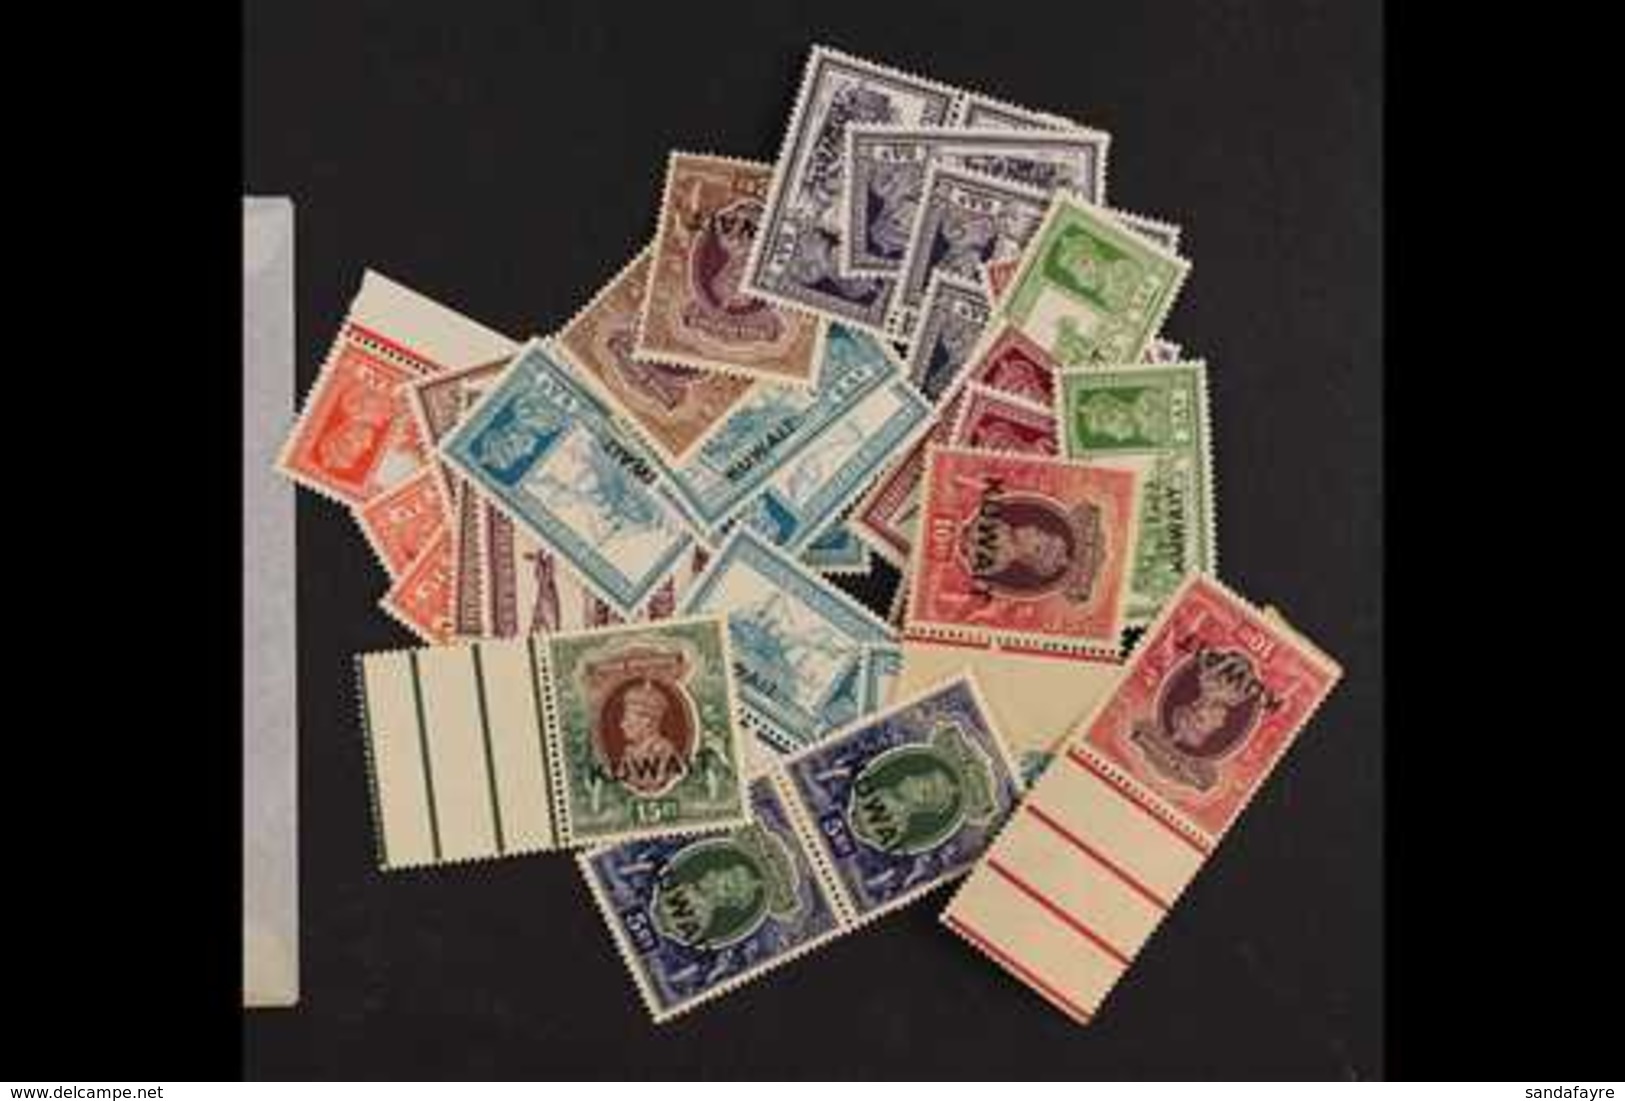 1939 GEORGE VI NEVER HINGED MINT ISSUES IN A PACKET Includes Most Values Of The Overprints On India Issue To 15r, Betwee - Koeweit